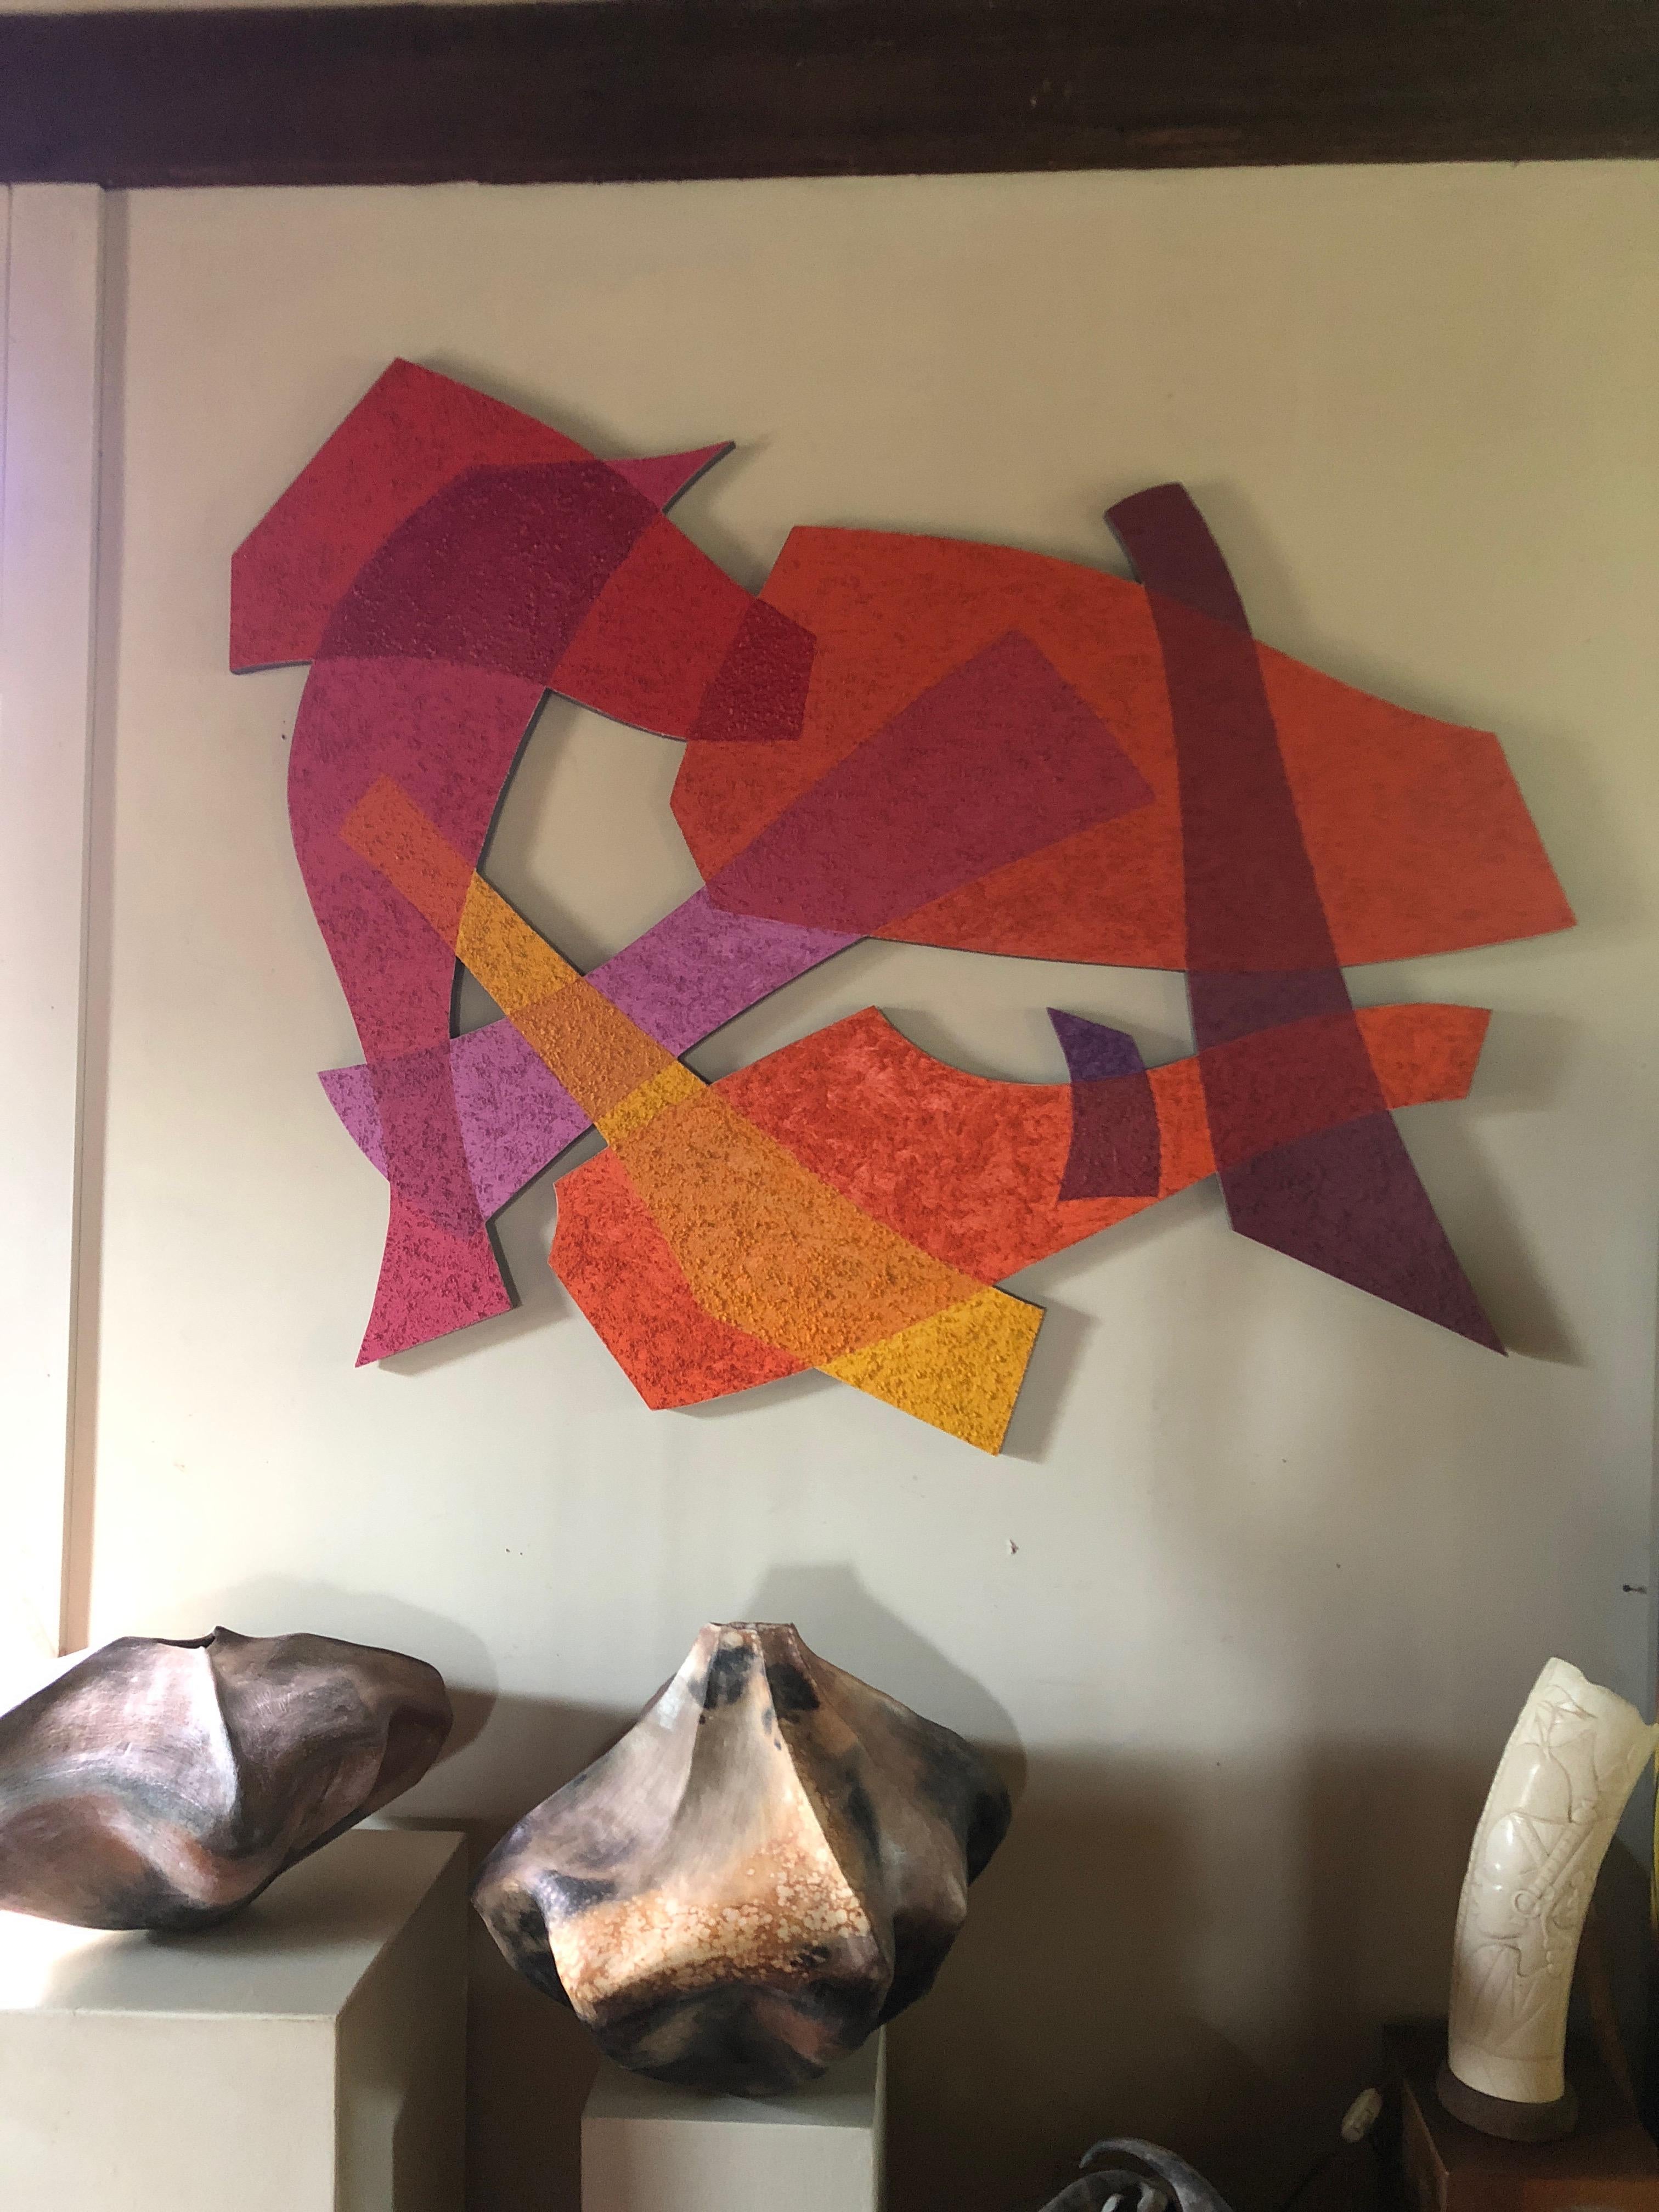 Super eye catching very large abstract acrylic and sand painting having a geometric cutout shape and bright colors that play with the eye and look like transparent layers overlapping one another. Canvas mounted on plywood with ingenious